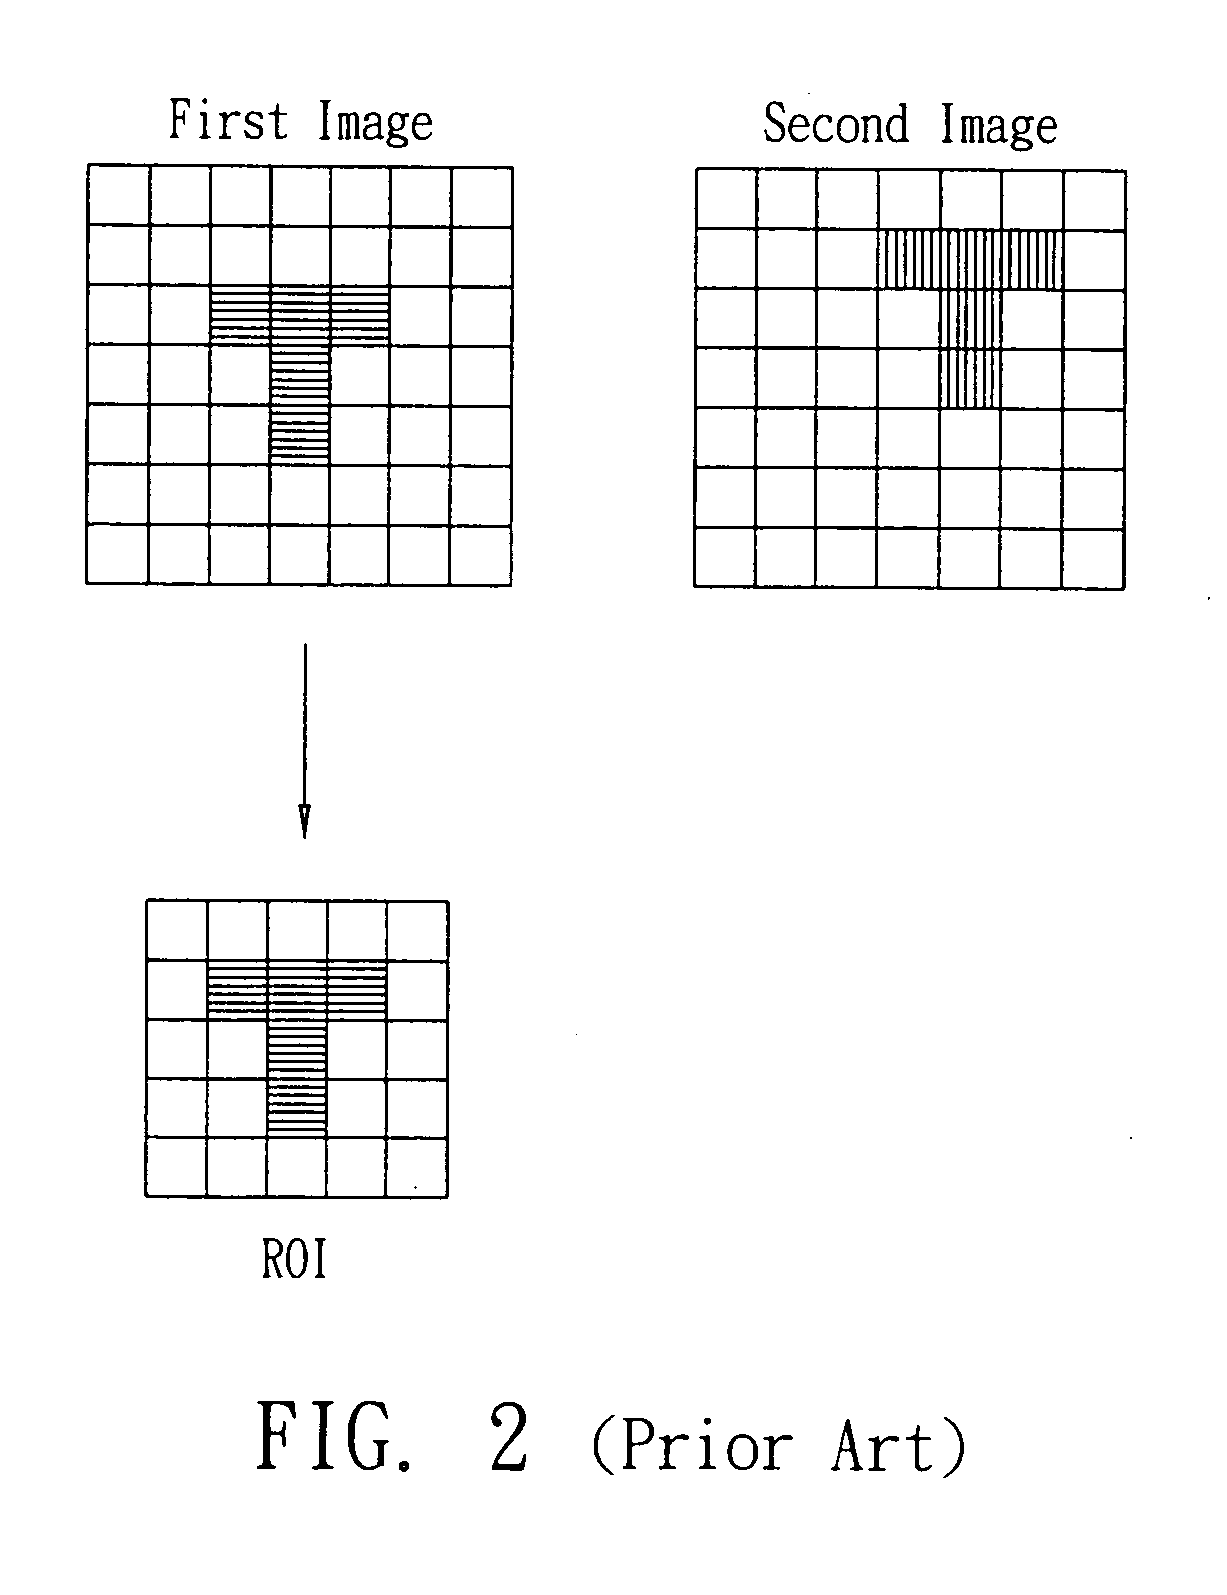 Displacement estimation device and method for the same